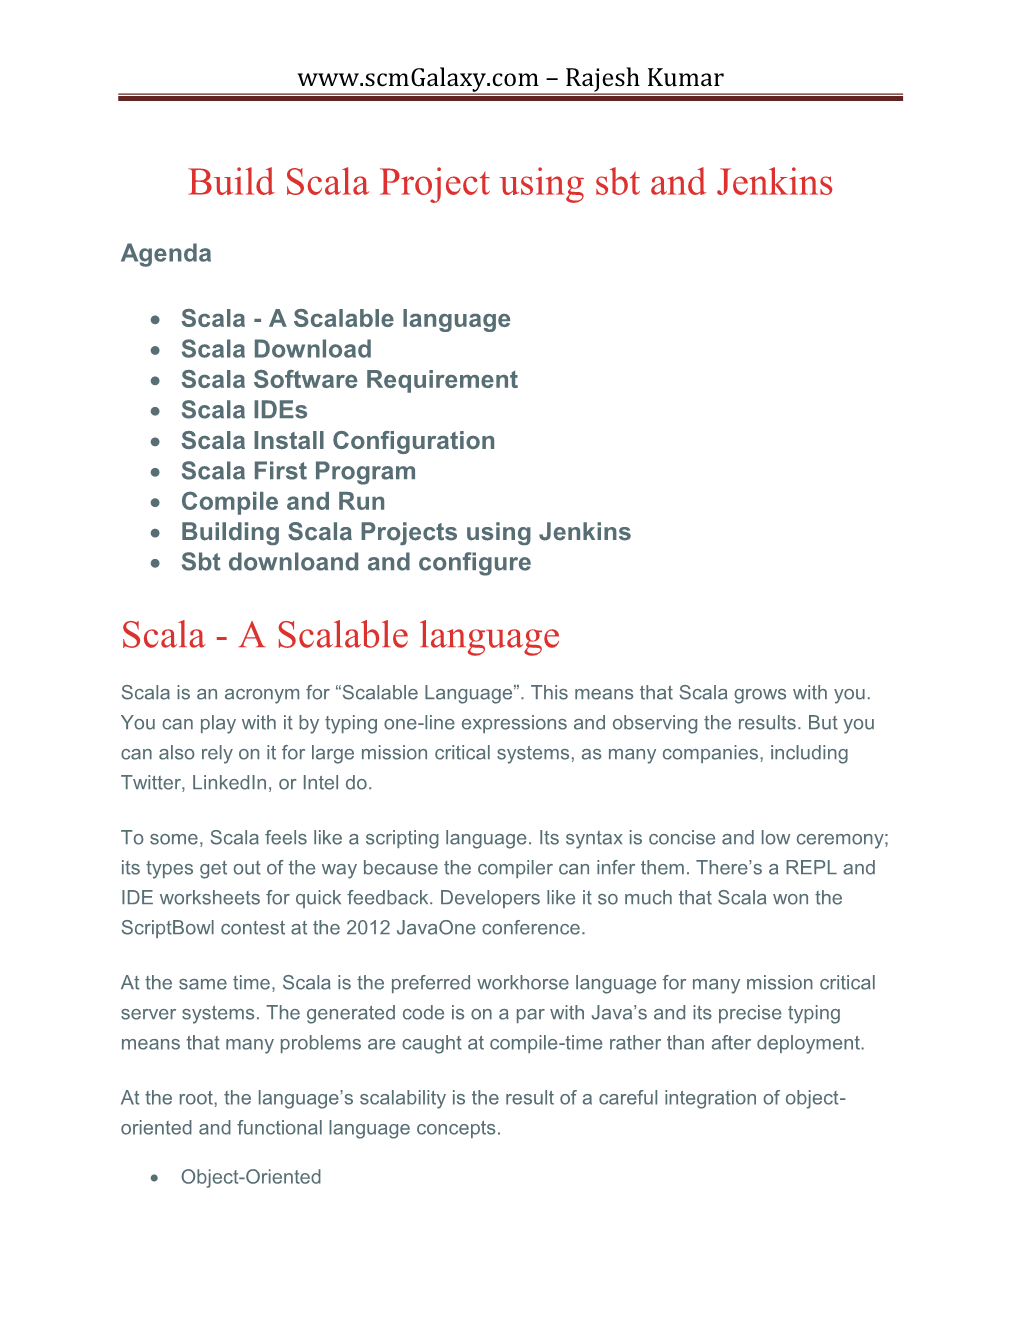 Build Scala Project Using Sbt and Jenkins